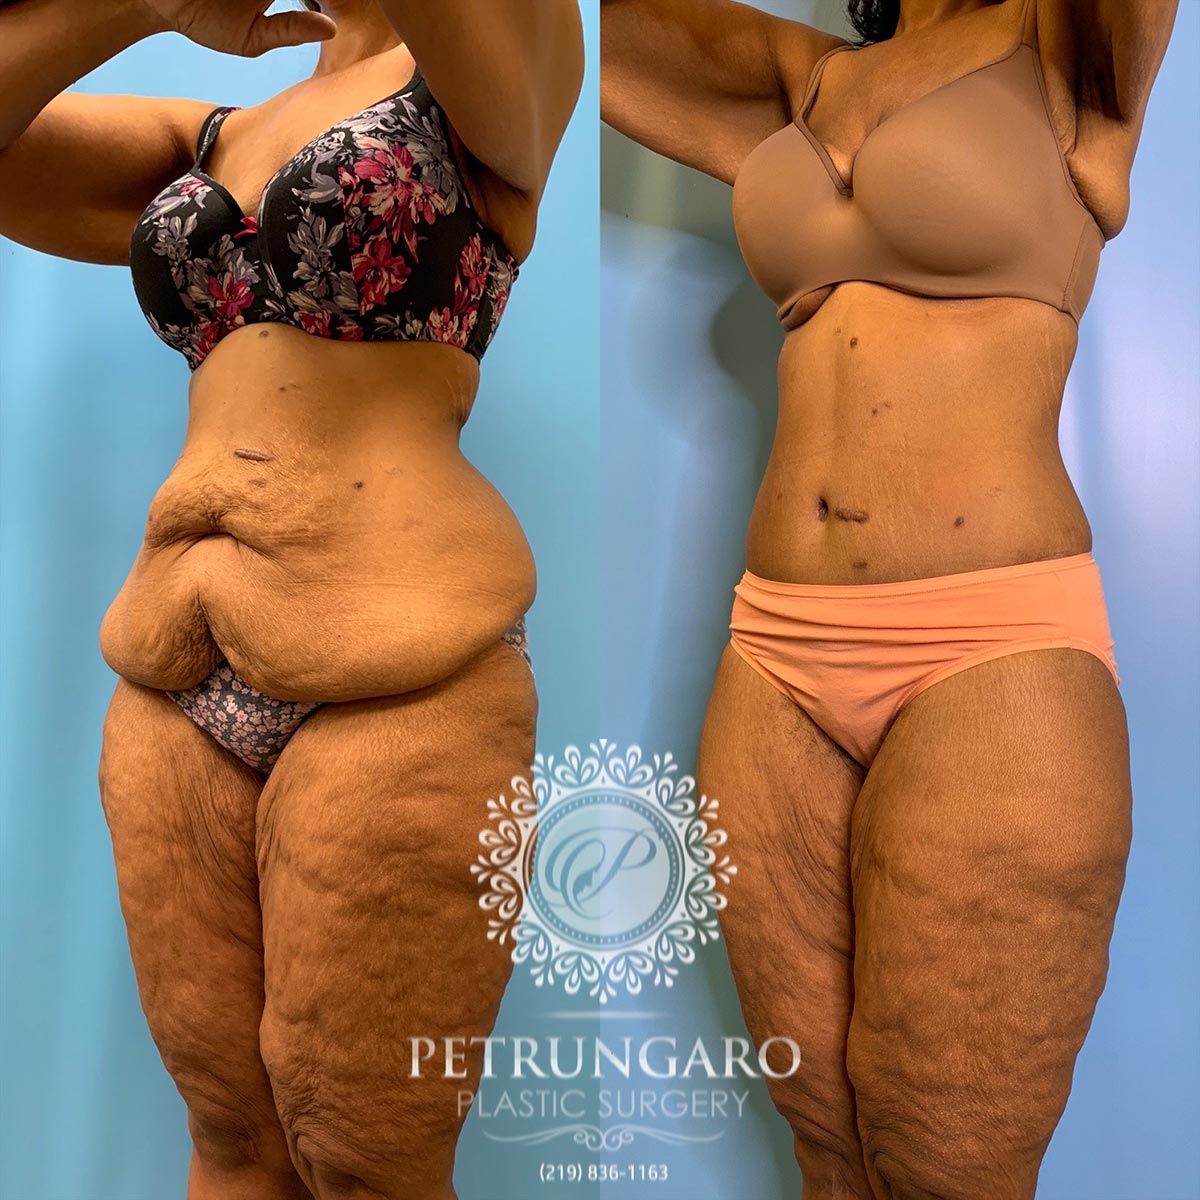 42 year old woman 3 months after a circumferential body lift-5